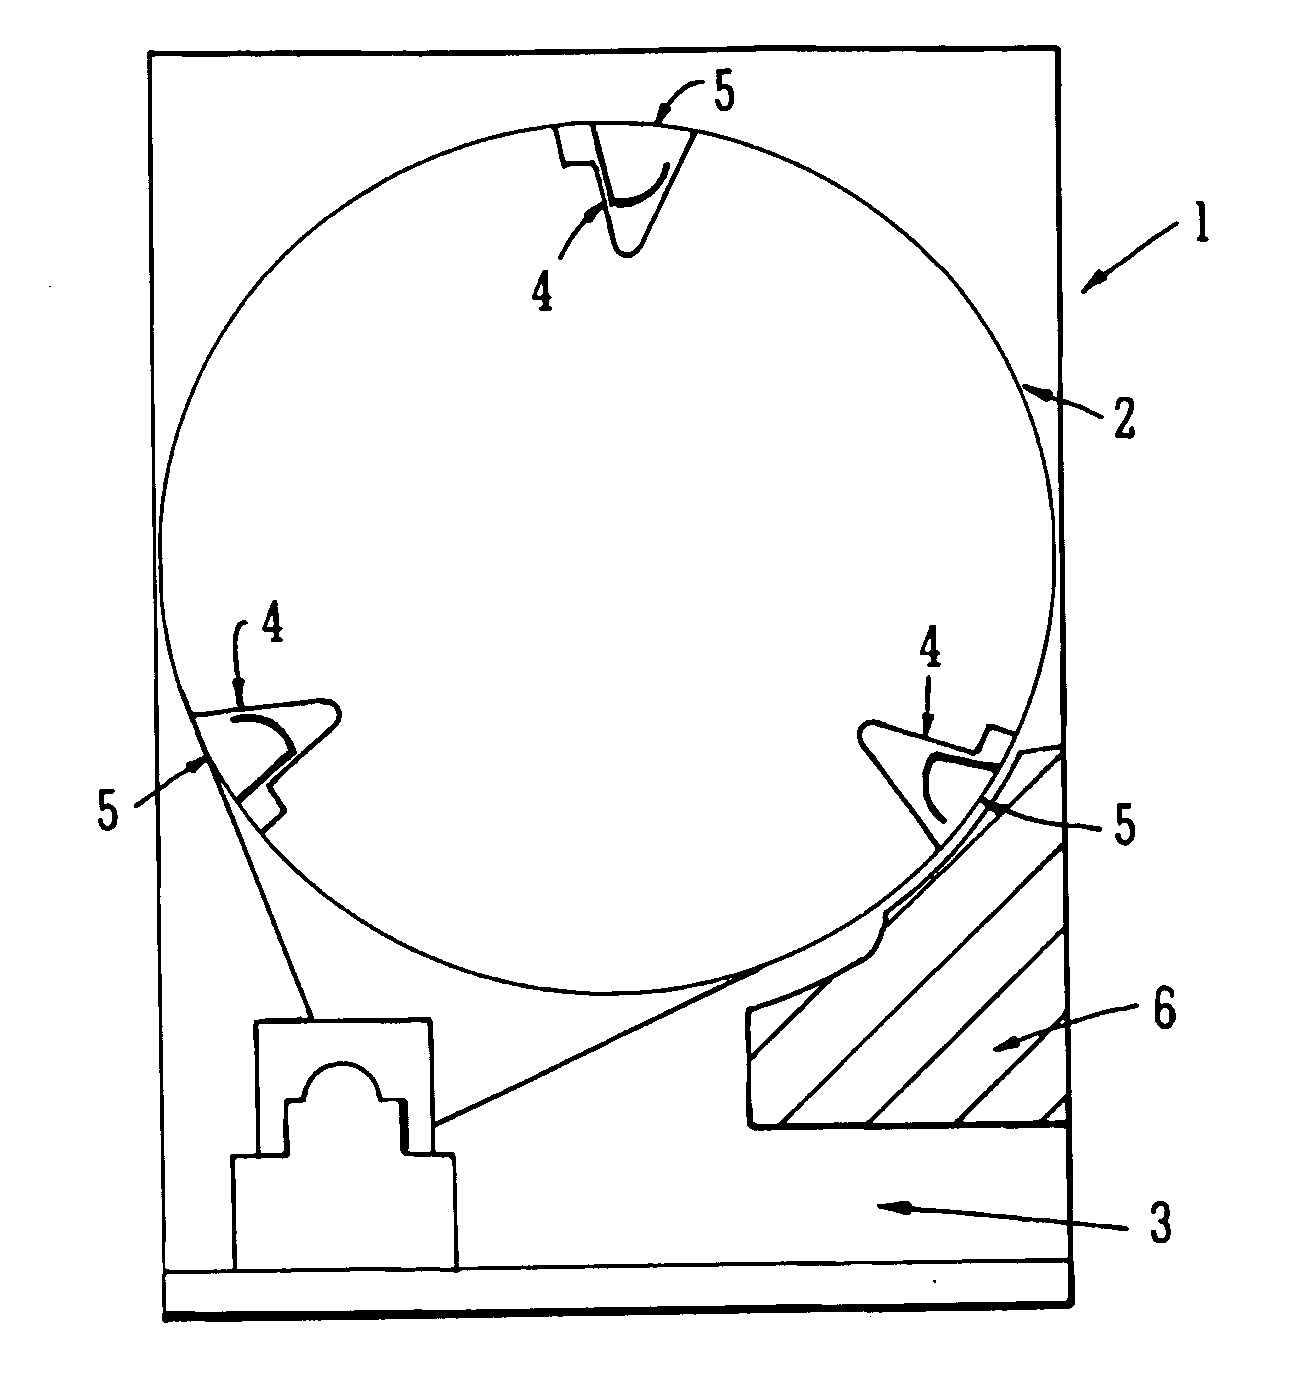 Improved cleaning apparatus and method